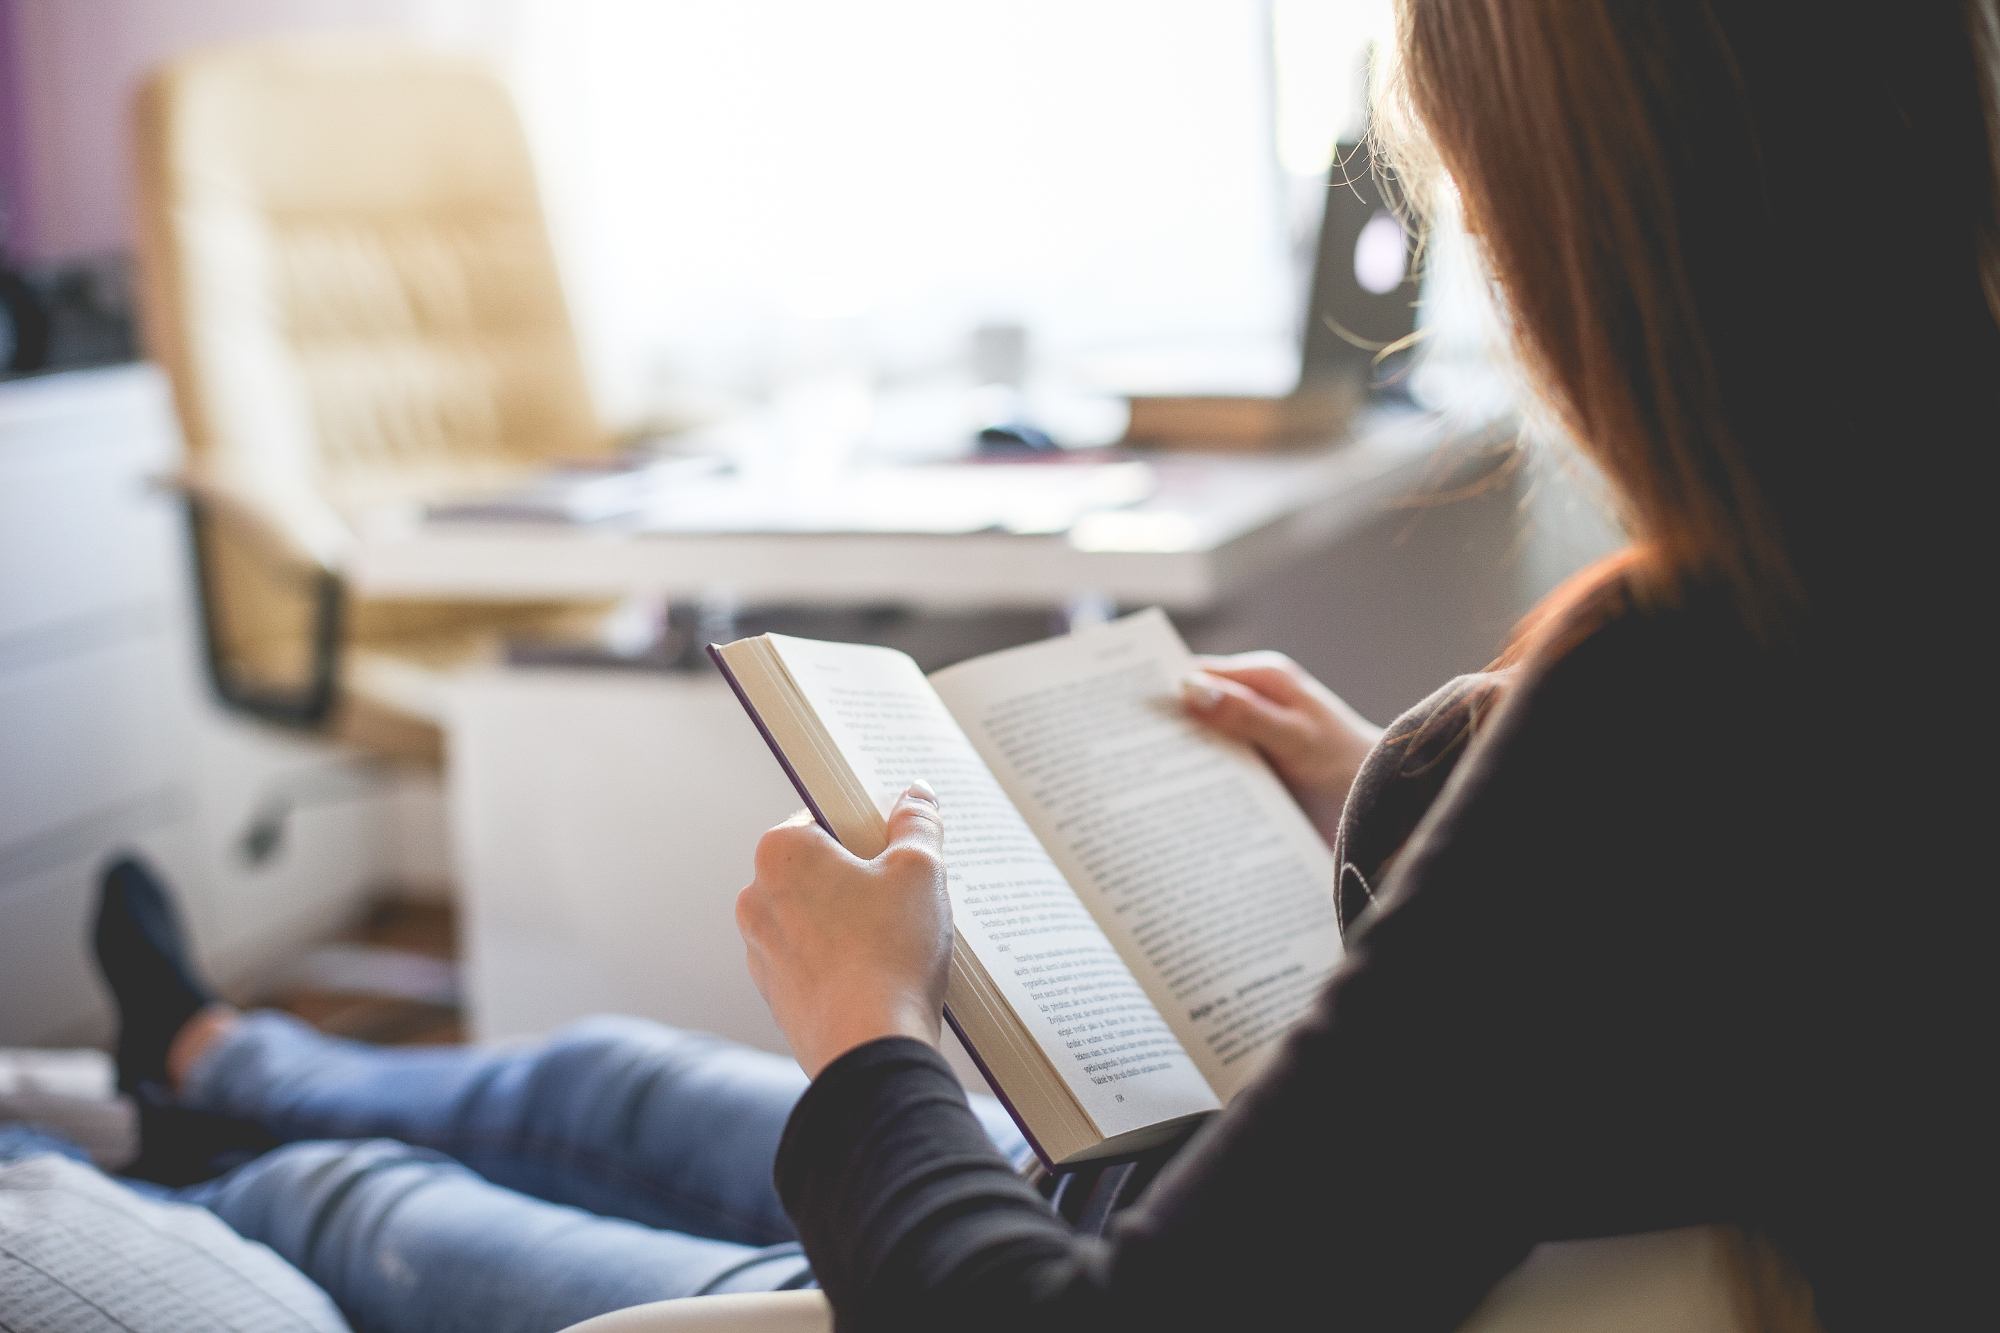 20 Self-Help Books To Better Your Life In All Aspects